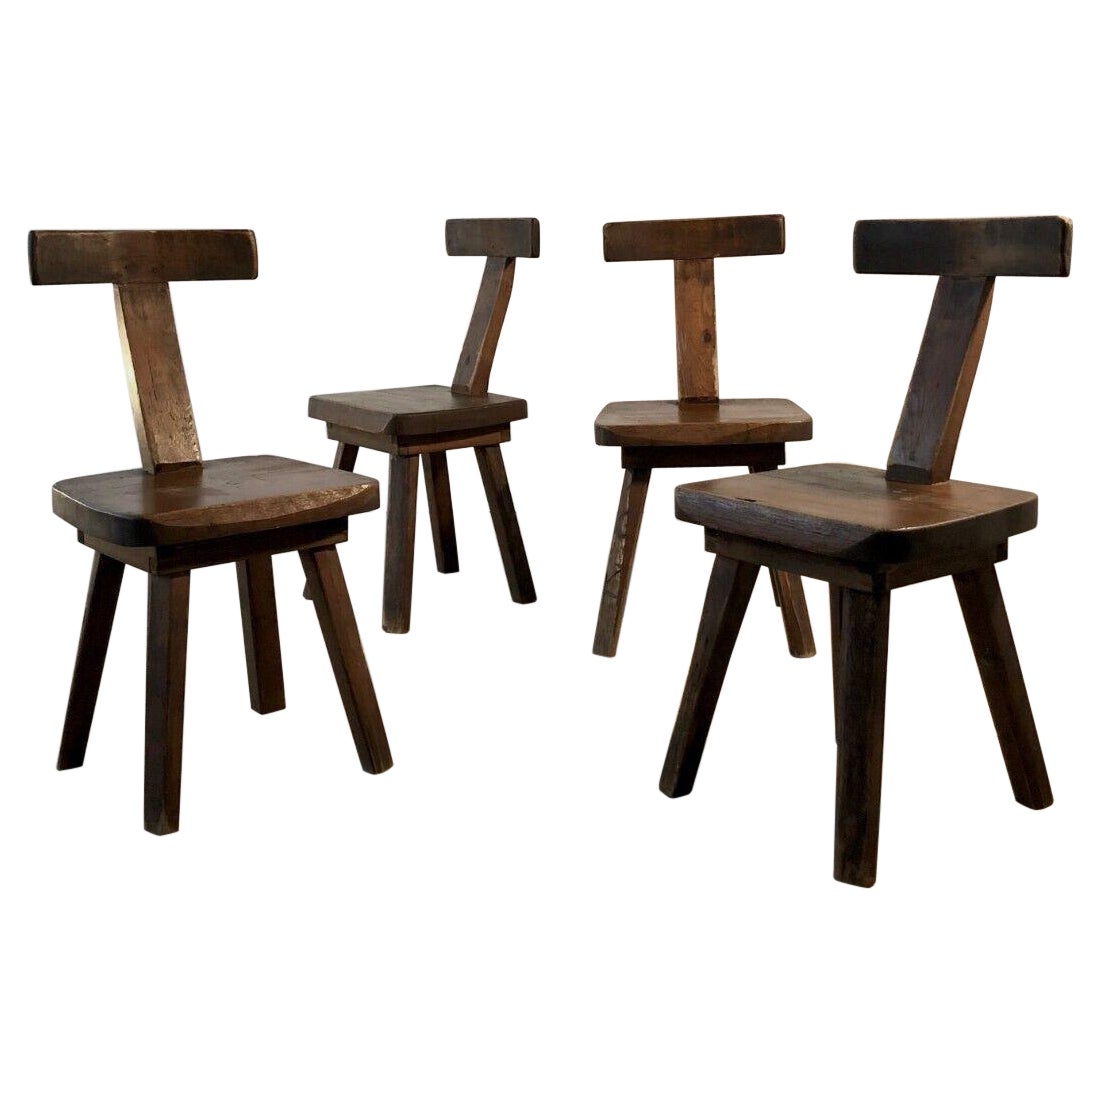 A Set of 4 BRUTALIST RUSTIC-MODERN MODERNIST "T" CHAIRS, by ARANJOU, France 1950